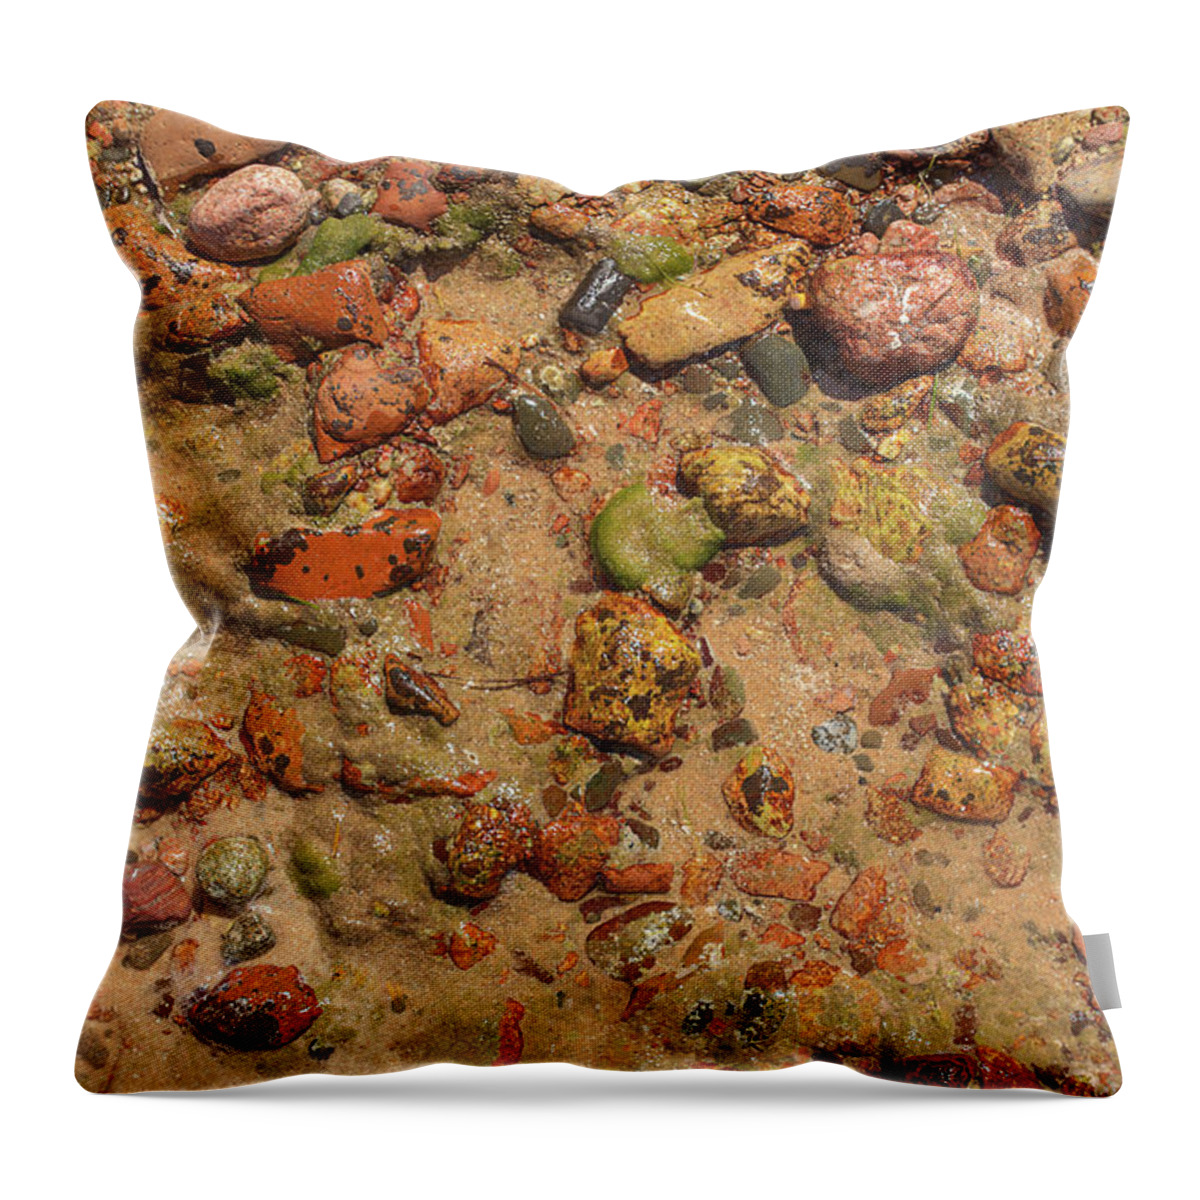 Photography Throw Pillow featuring the photograph Rocky Beach 5 by Nicola Nobile